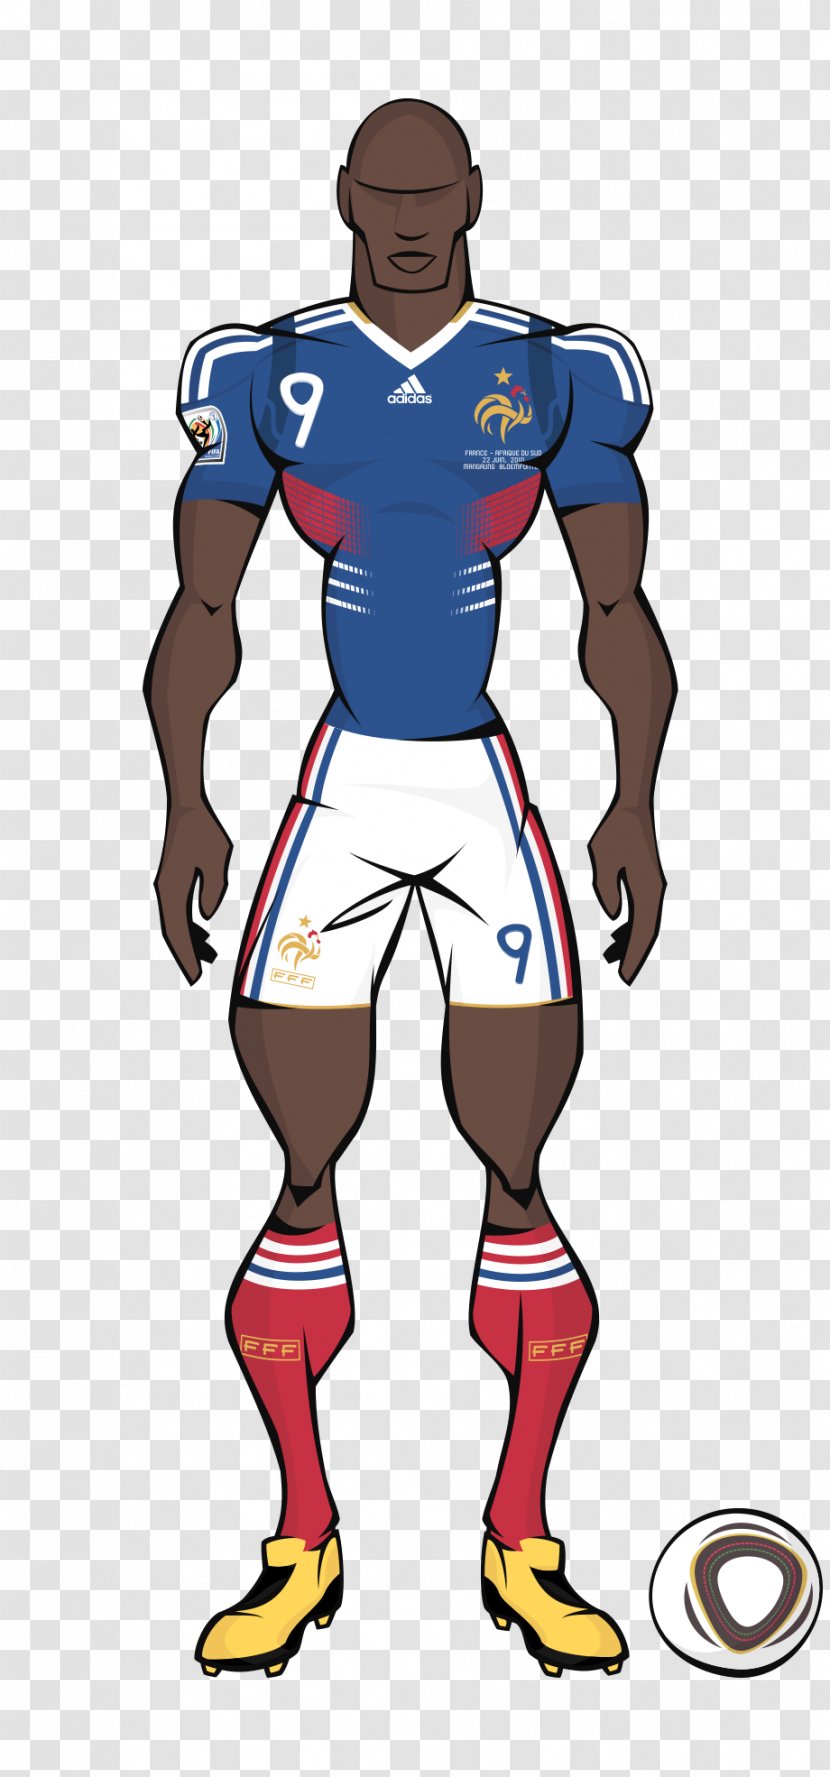 1998 FIFA World Cup Netherlands National Football Team Brazil Colombia France - Costume Transparent PNG